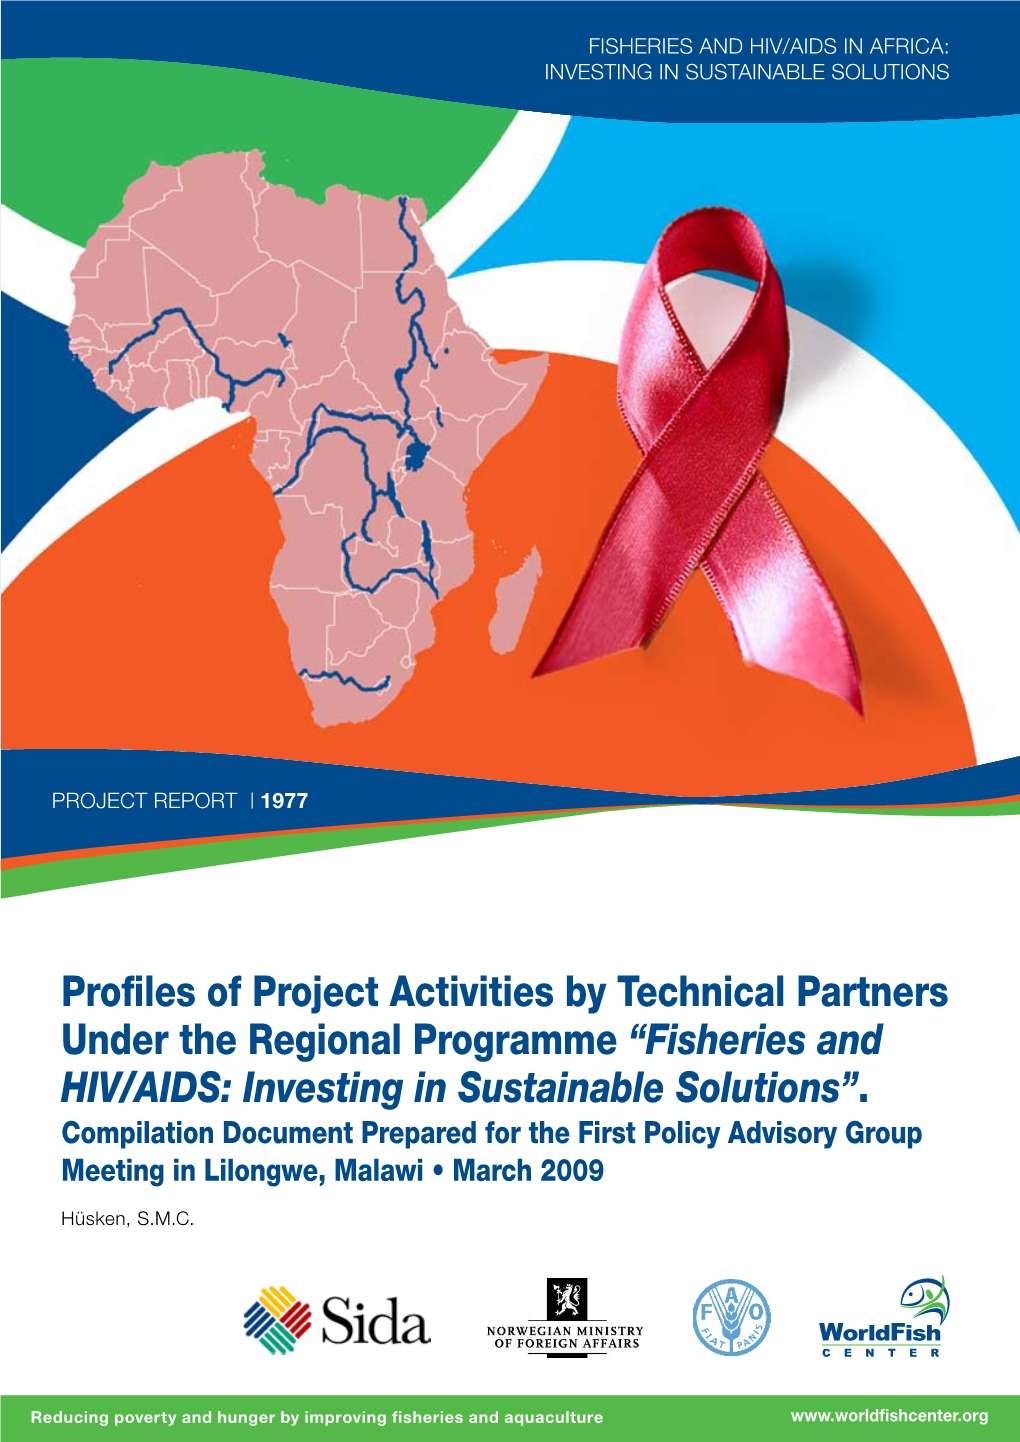 Fisheries and HIV/AIDS: Investing in Sustainable Solutions”